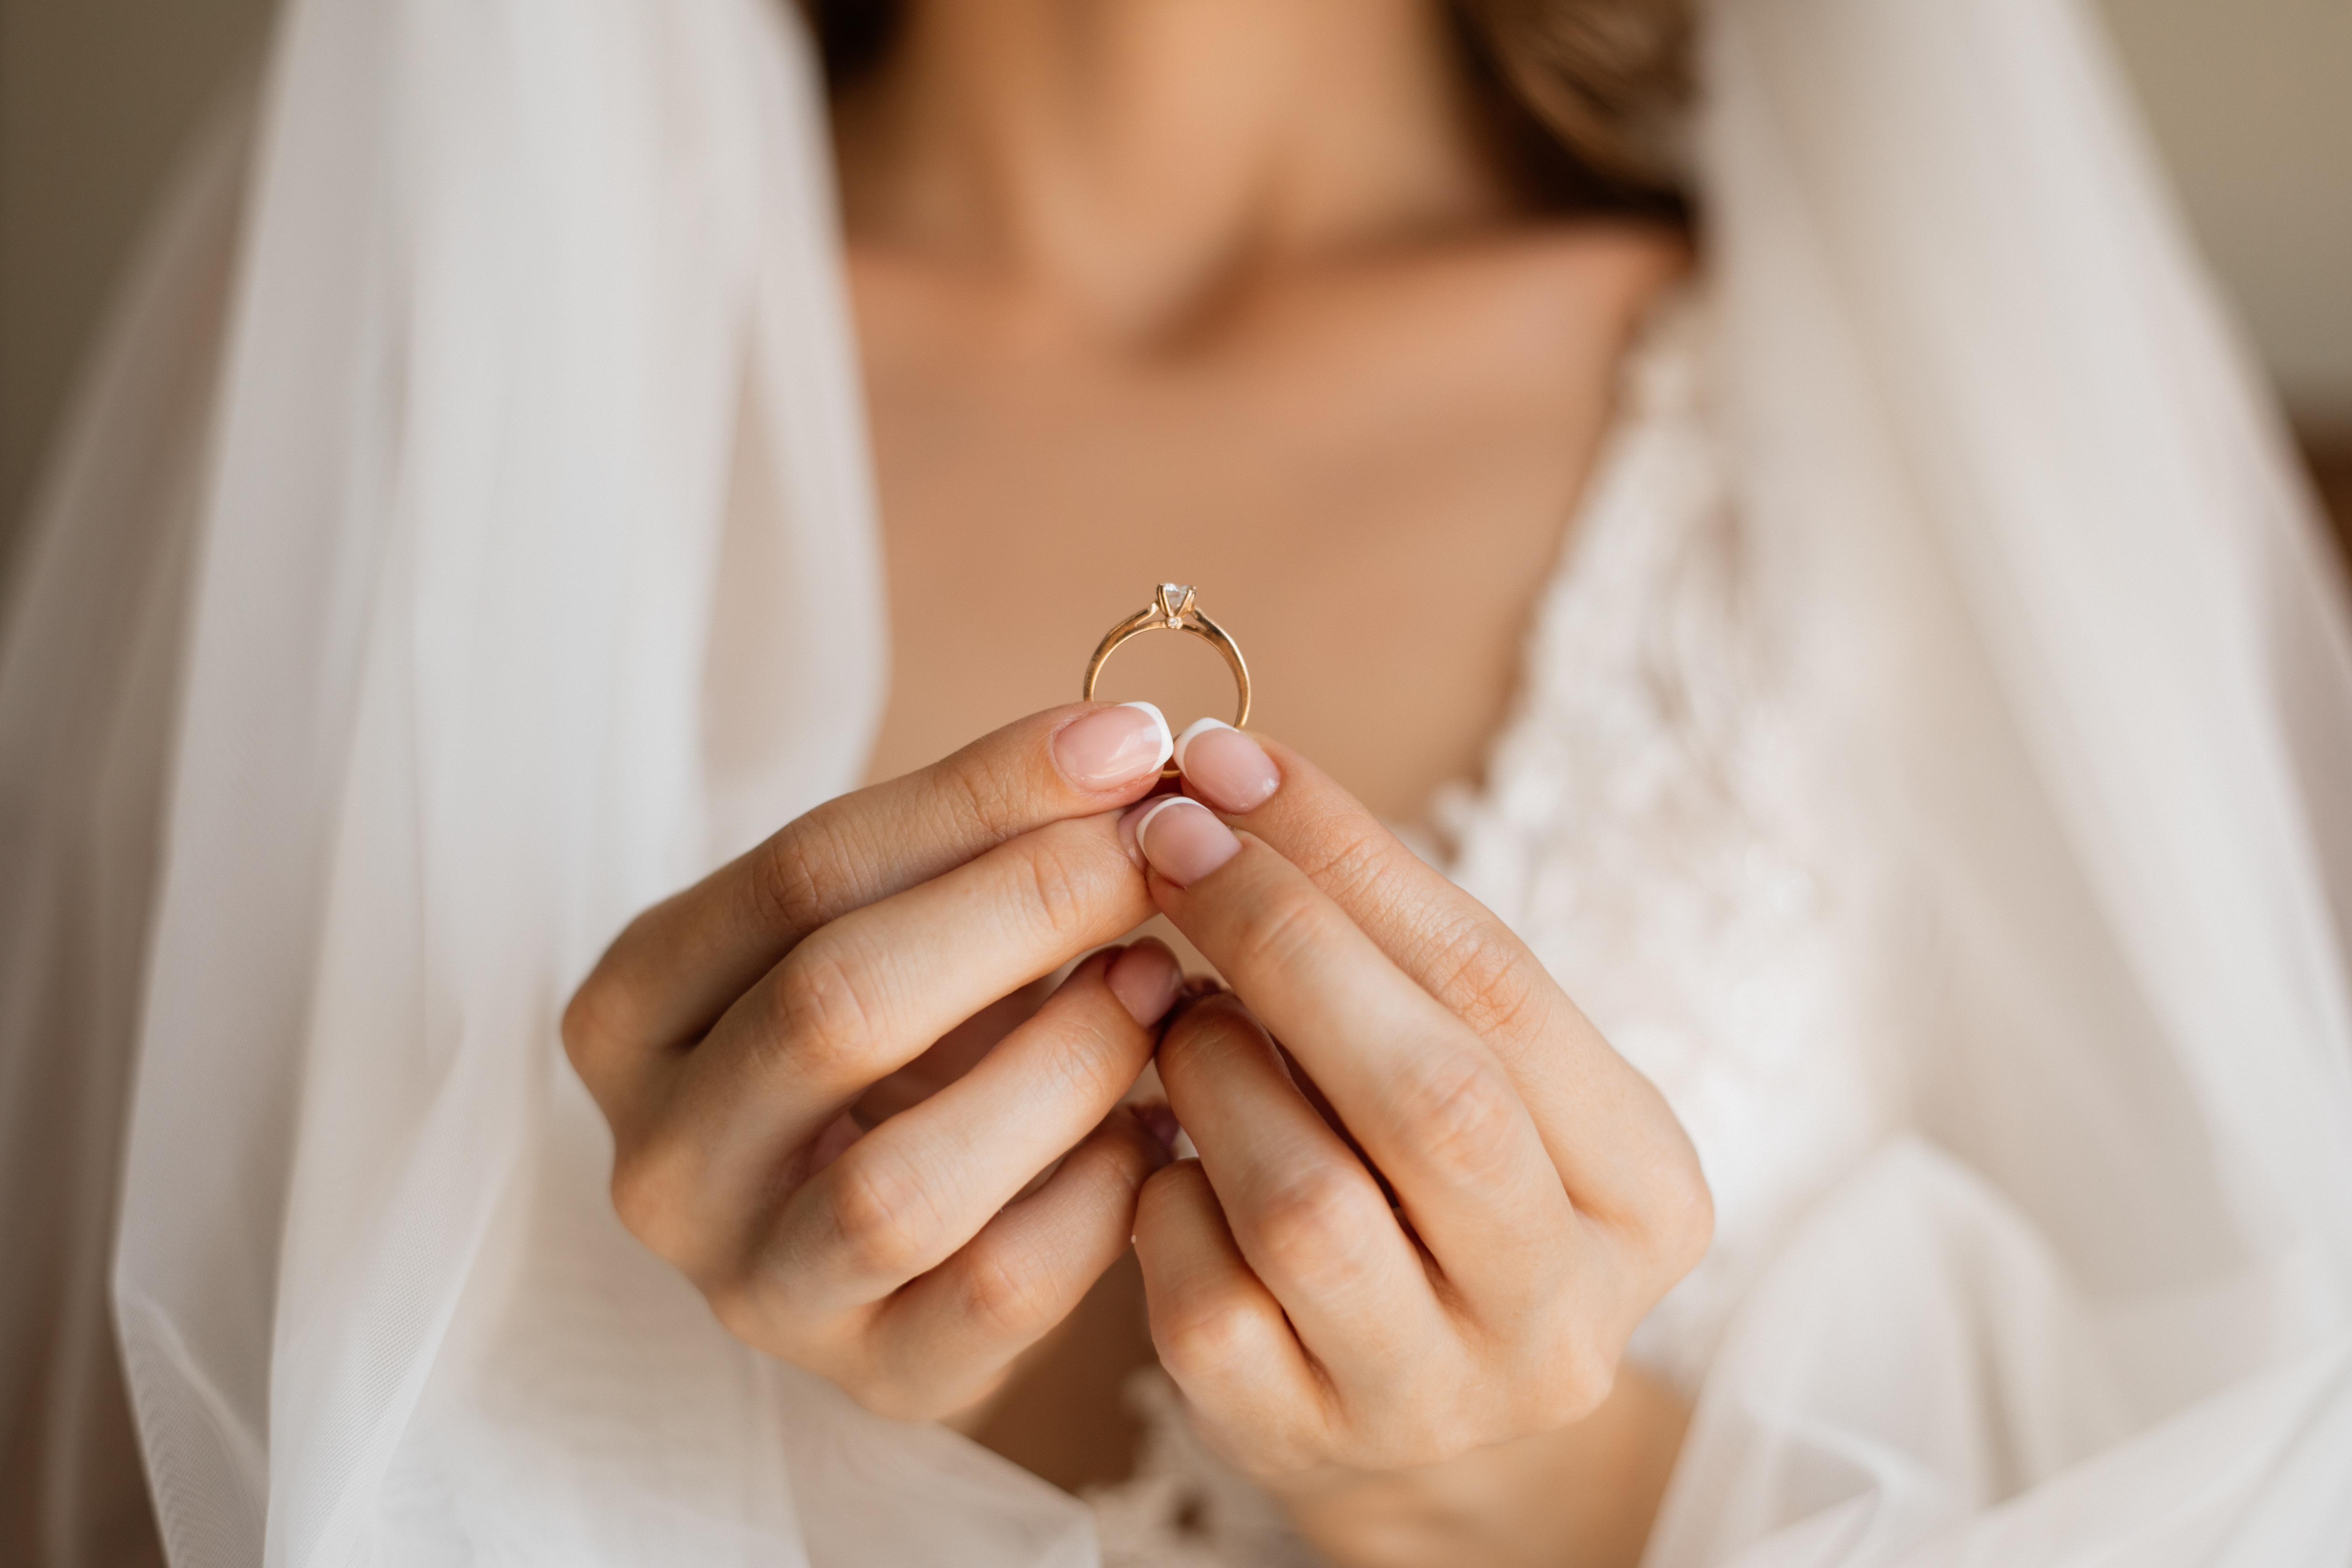 Front view of bride is holding precious engagement ring in hands in front of chest and wedding veil